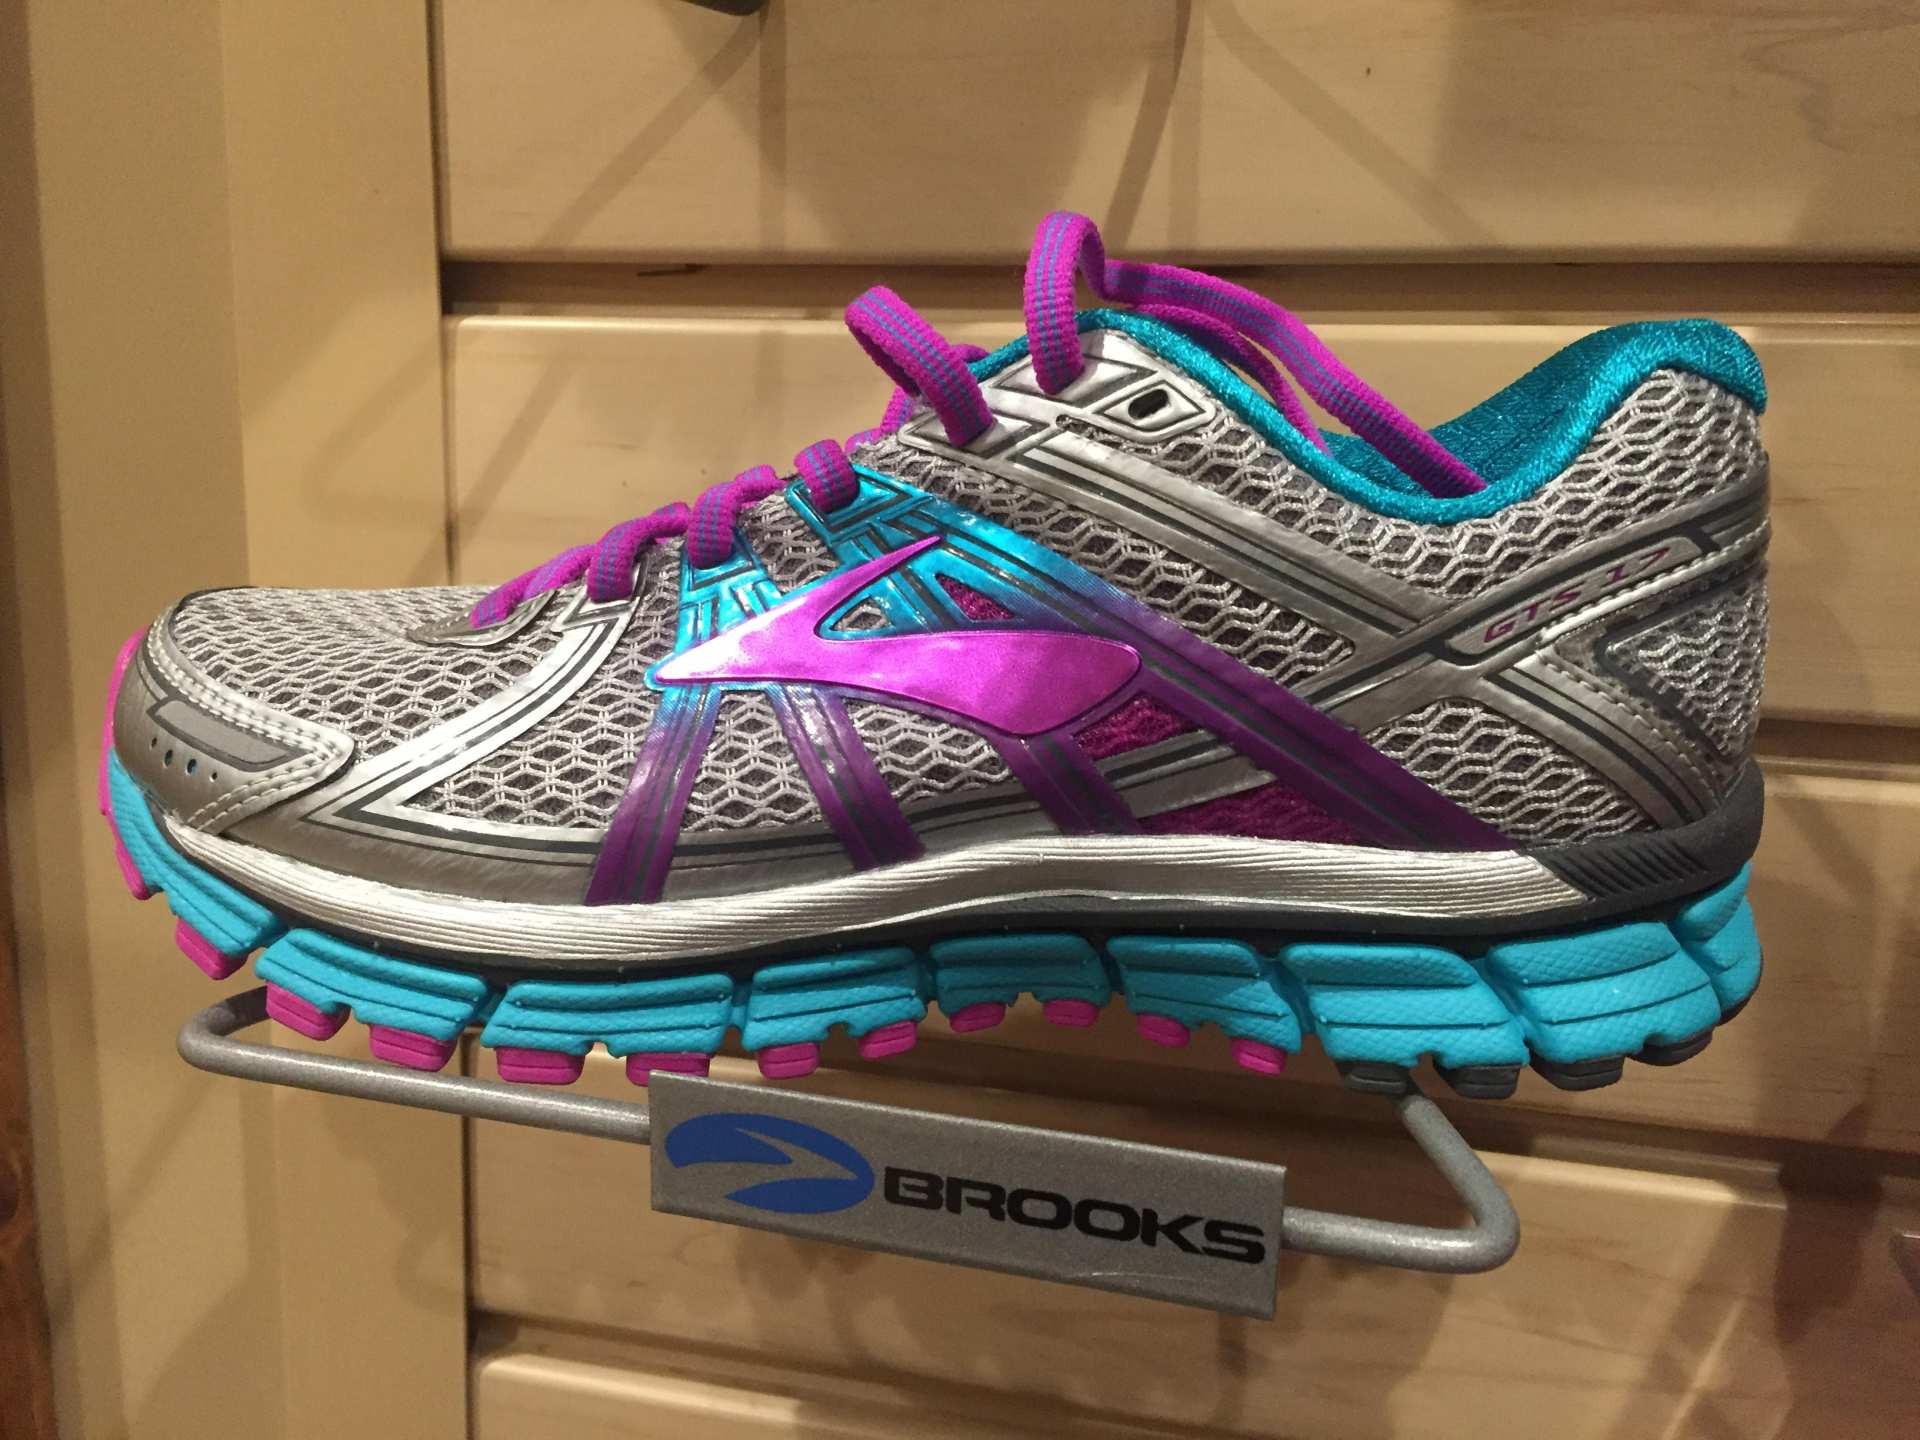 about brooks running shoes